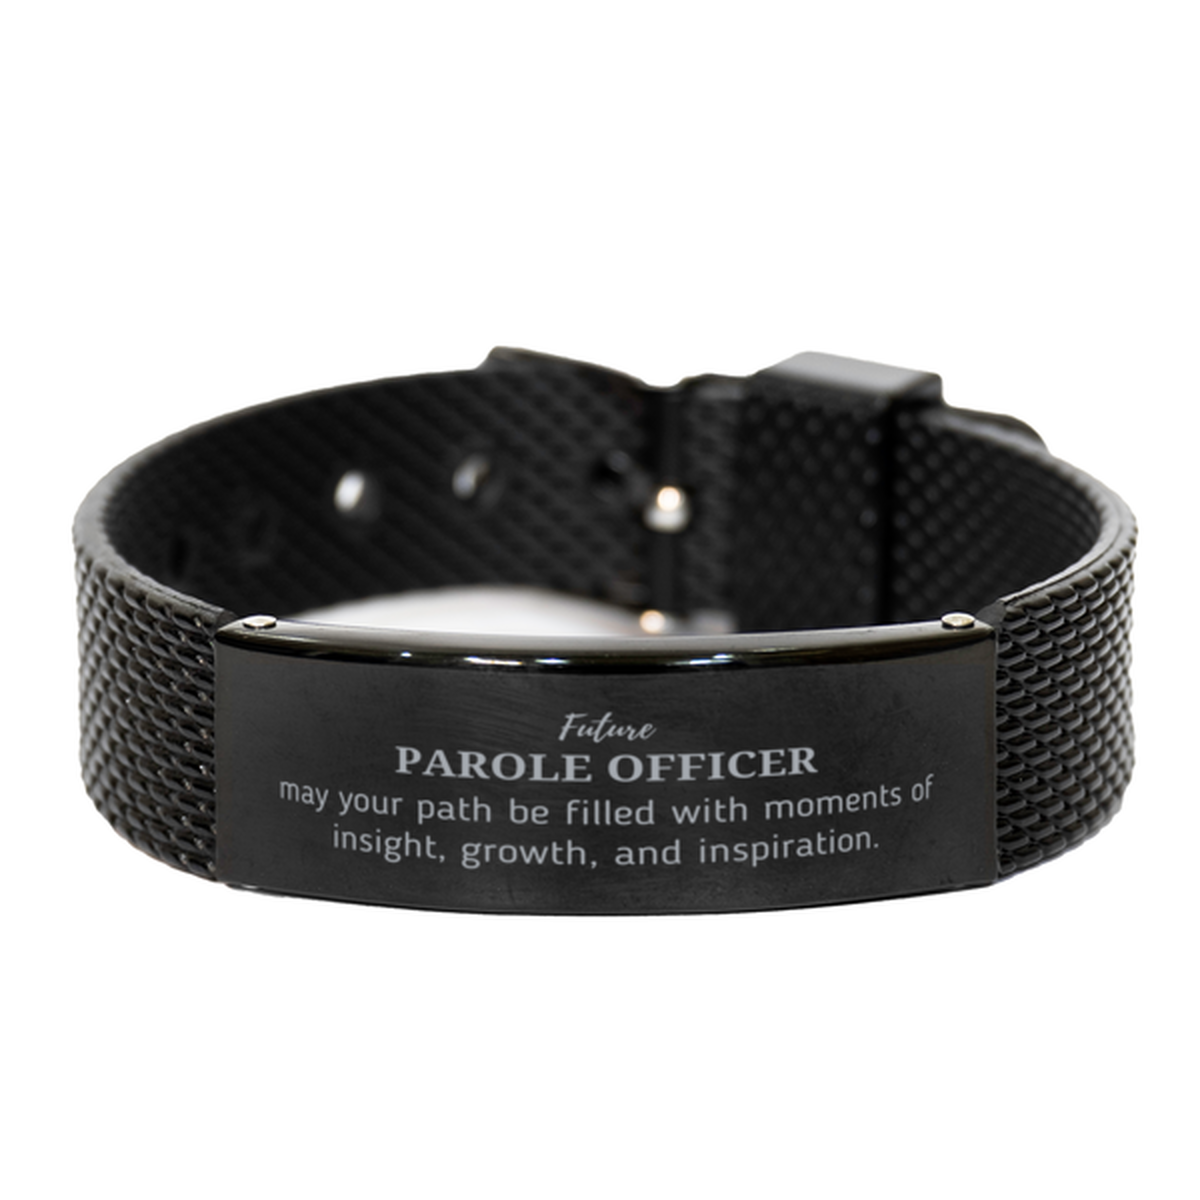 Future Parole Officer Gifts, May your path be filled with moments of insight, Graduation Gifts for New Parole Officer, Christmas Unique Black Shark Mesh Bracelet For Men, Women, Friends